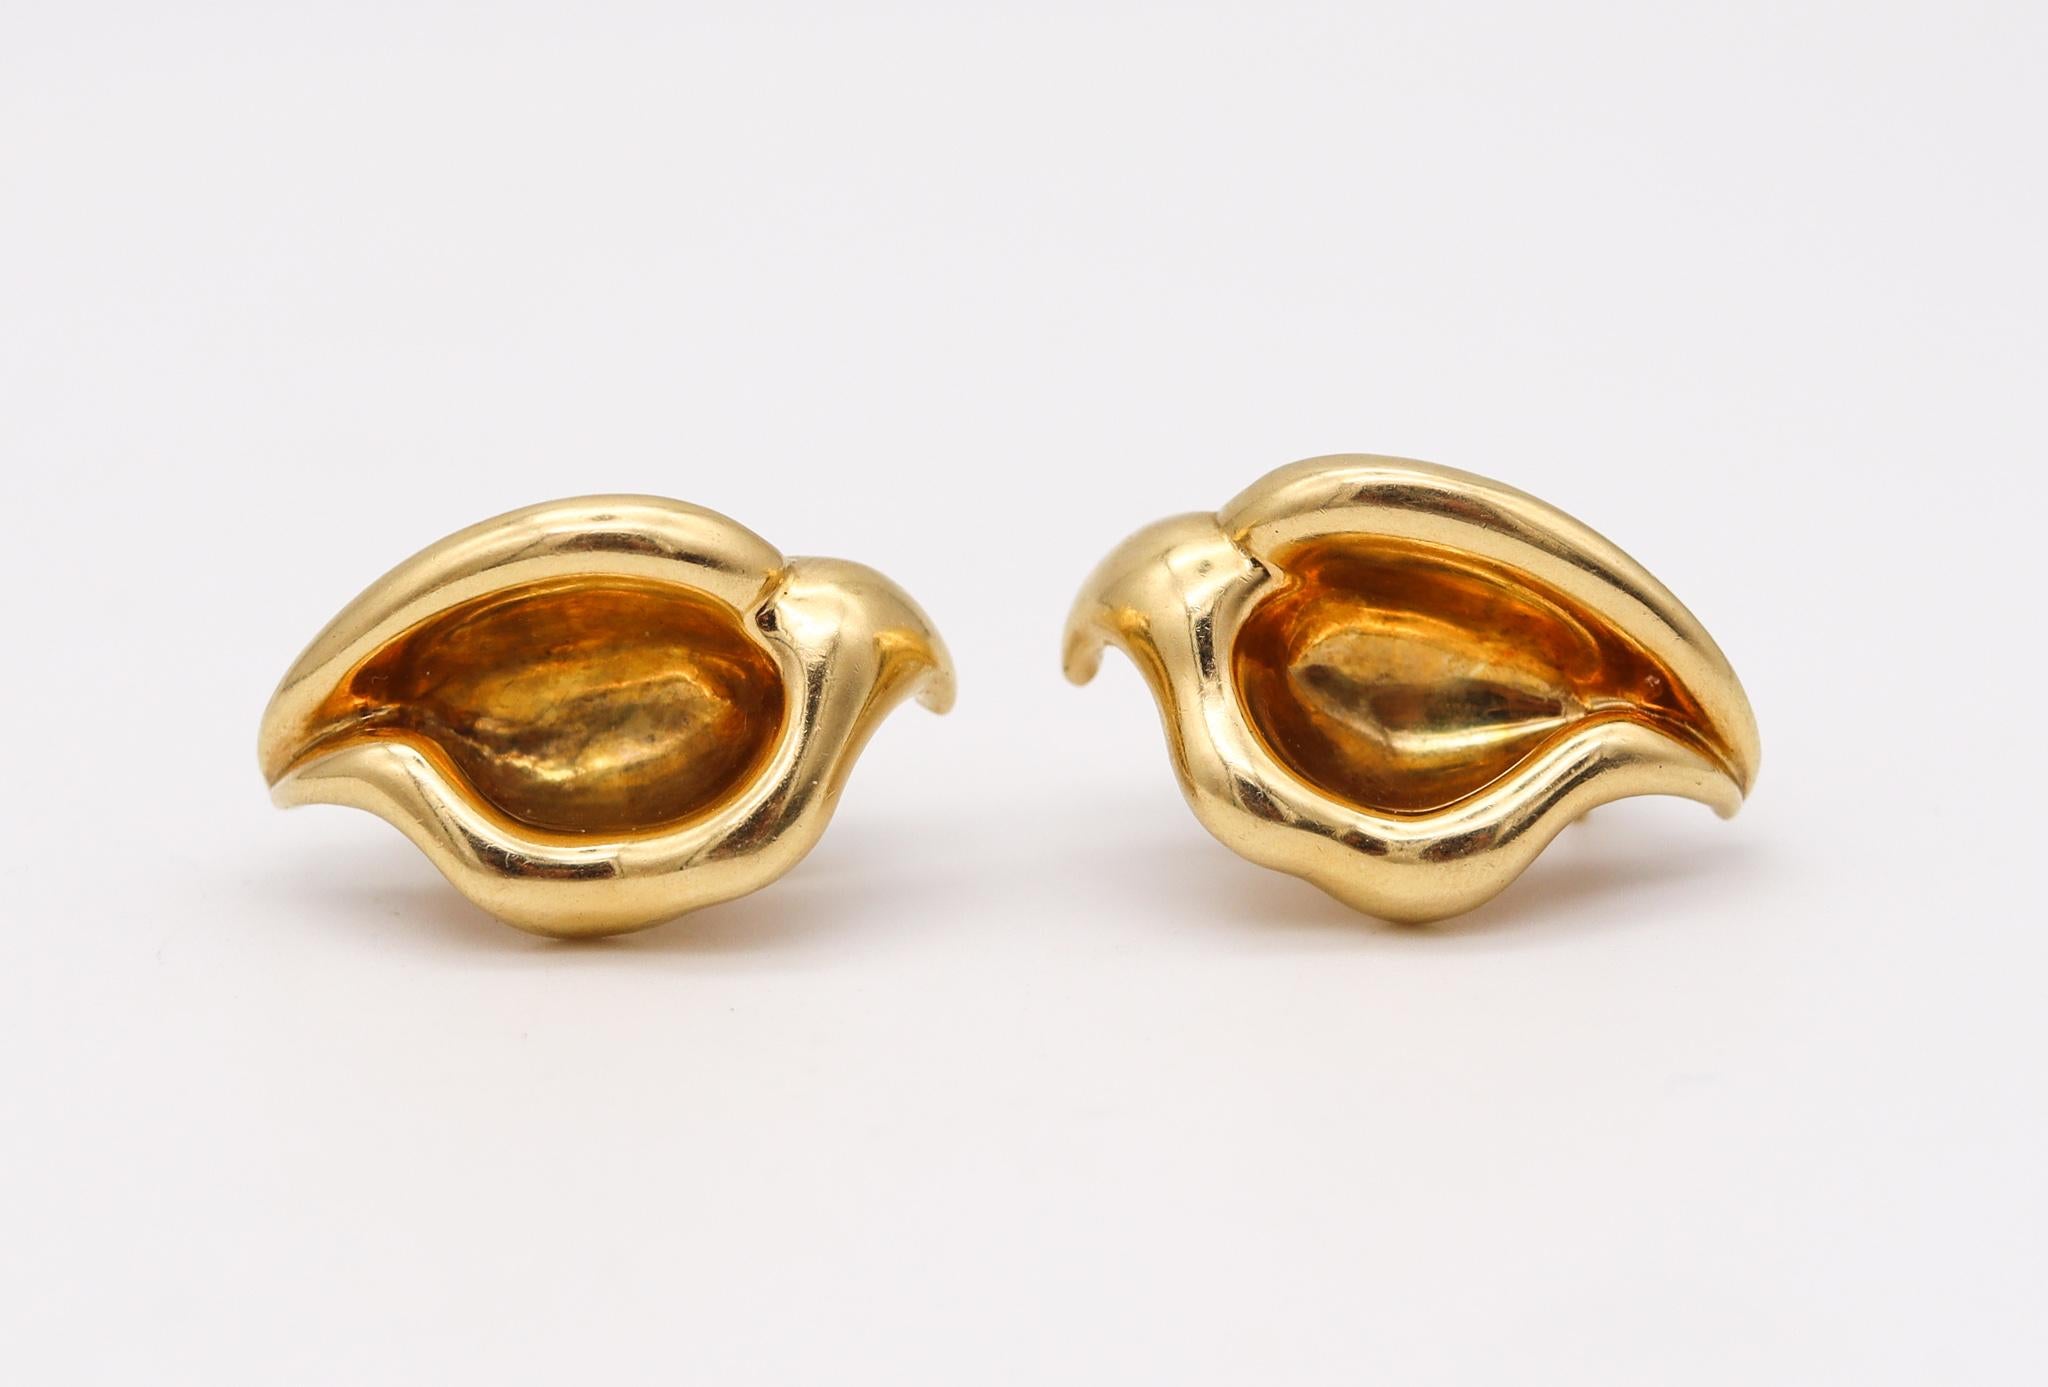 Calla Earrings designed by Elsa Peretti (1940-2021) for Tiffany & Co.

An sculptural free form pair of earrings designed by Elsa Peretti, back in the 1980's in the shape of a calla lily. Is a beautiful abstraction of the flower, crafted in solid